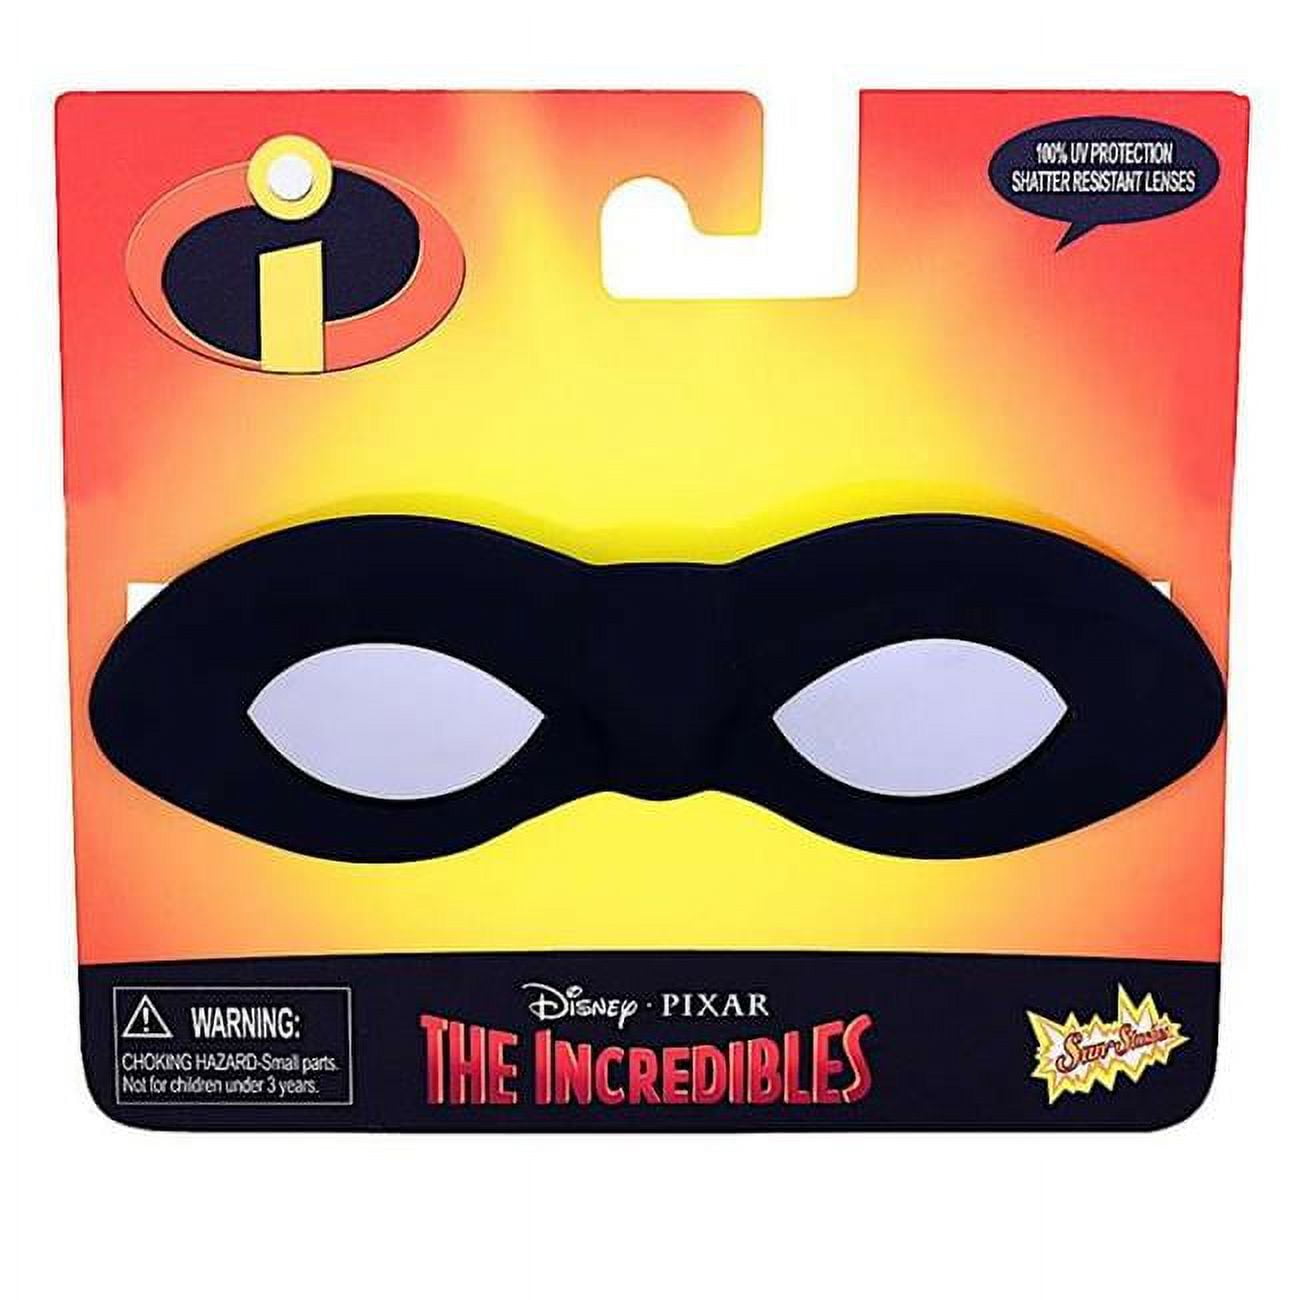 Sunstaches Sg2586 The Incredibles Novelty Sunglasses